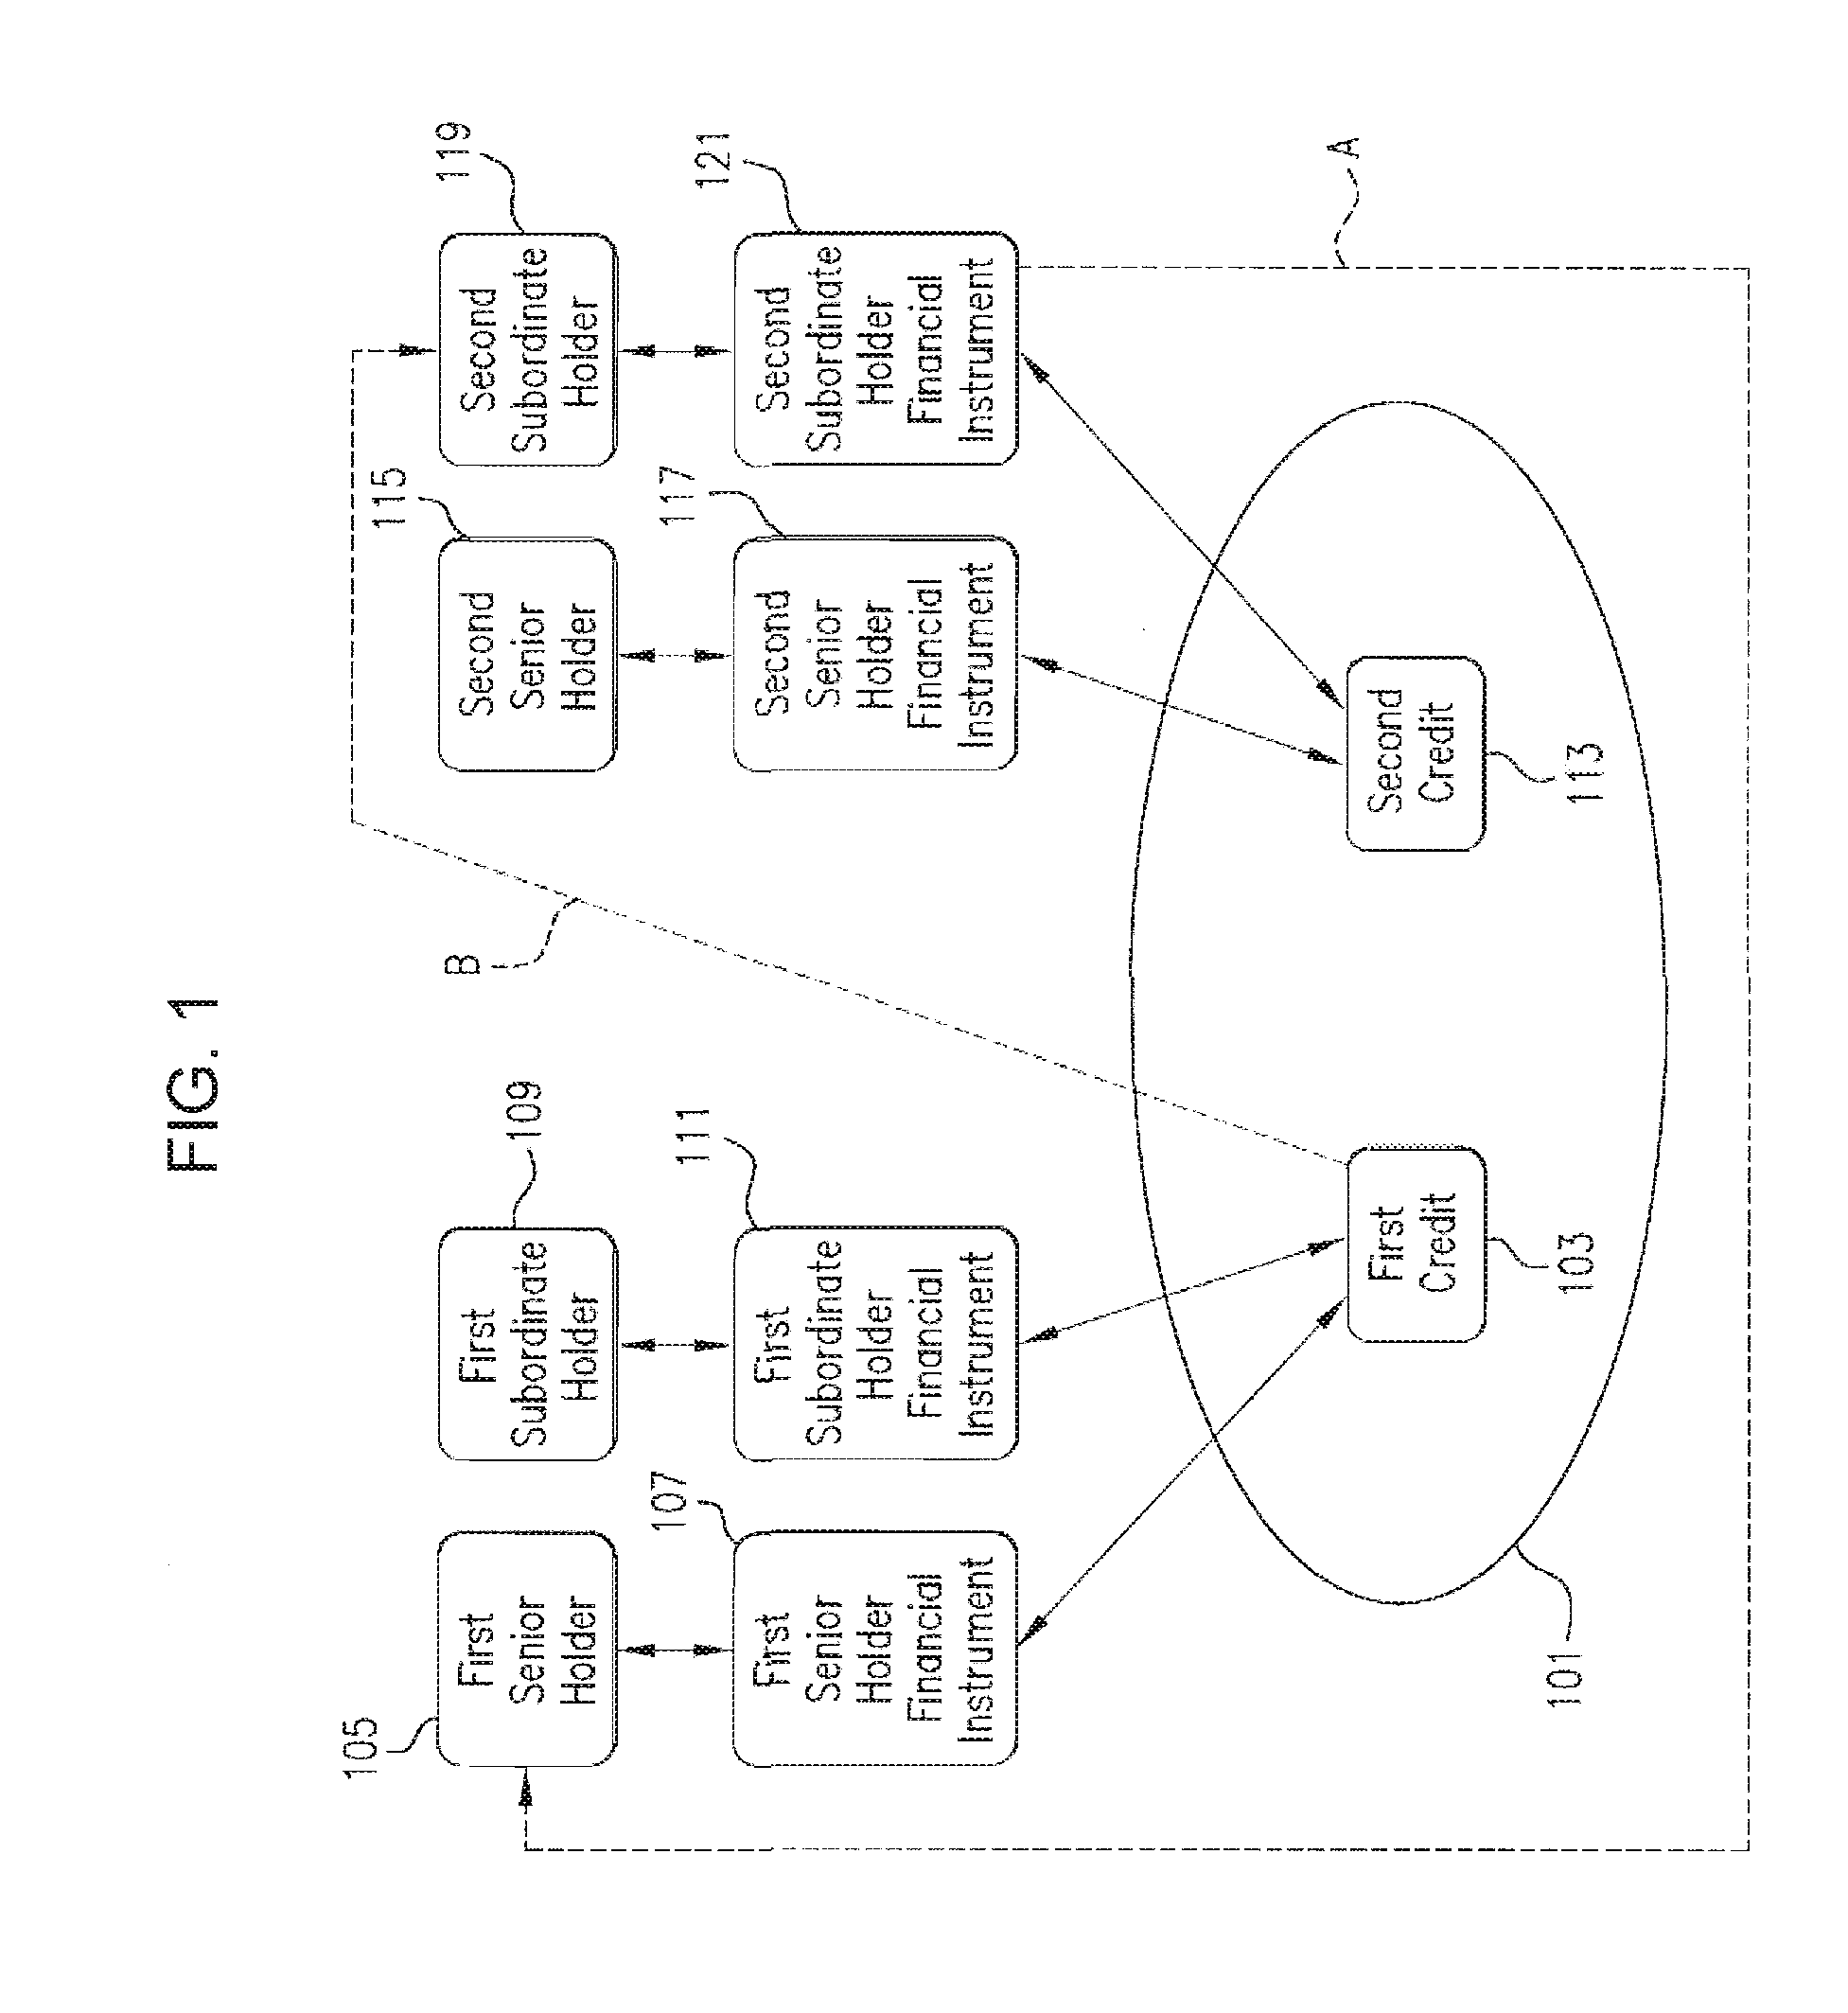 Method, software program, and system for structuring risk in a financial transaction